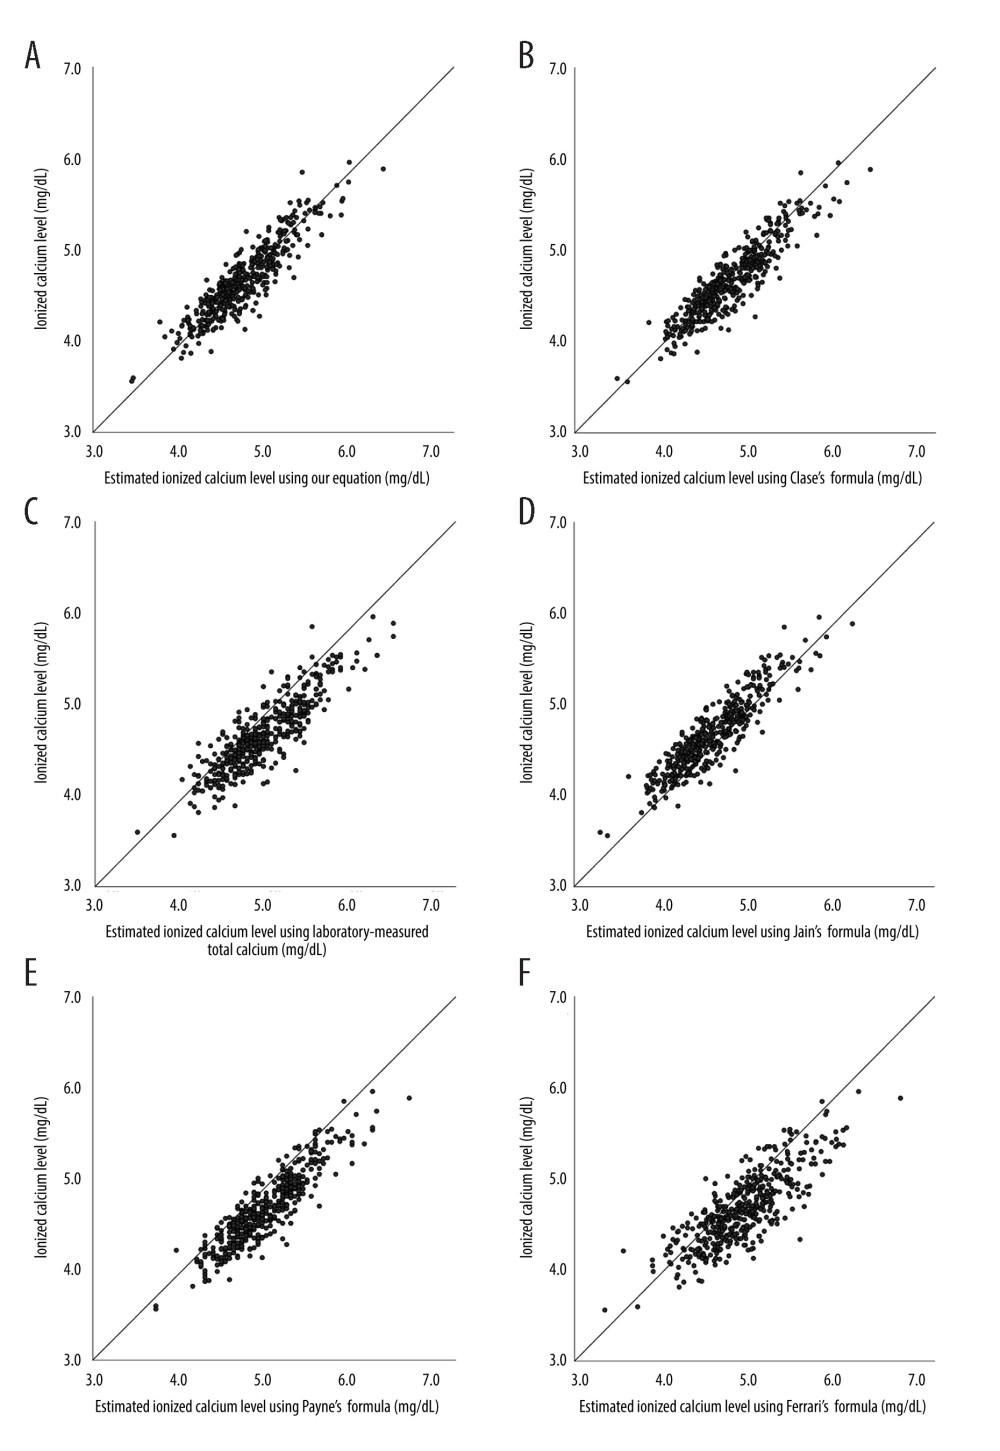 Scatter plots of estimated Ca by (A) our equation, (B) laboratory-measured total calcium formula, (C) Payne’s formula, (D) Clase’s formula, (E) Jain’s formula, and (F) Ferrari’s formula versus laboratory-measured ionized calcium level in patients on long-term hemodialysis. Reference line indicates the function of Y=X. (Software used for figure creation: SPSS, version 26.0, manufacturer IBM. Further modified with: PowerPoint, version 2306, manufacturer Microsoft).